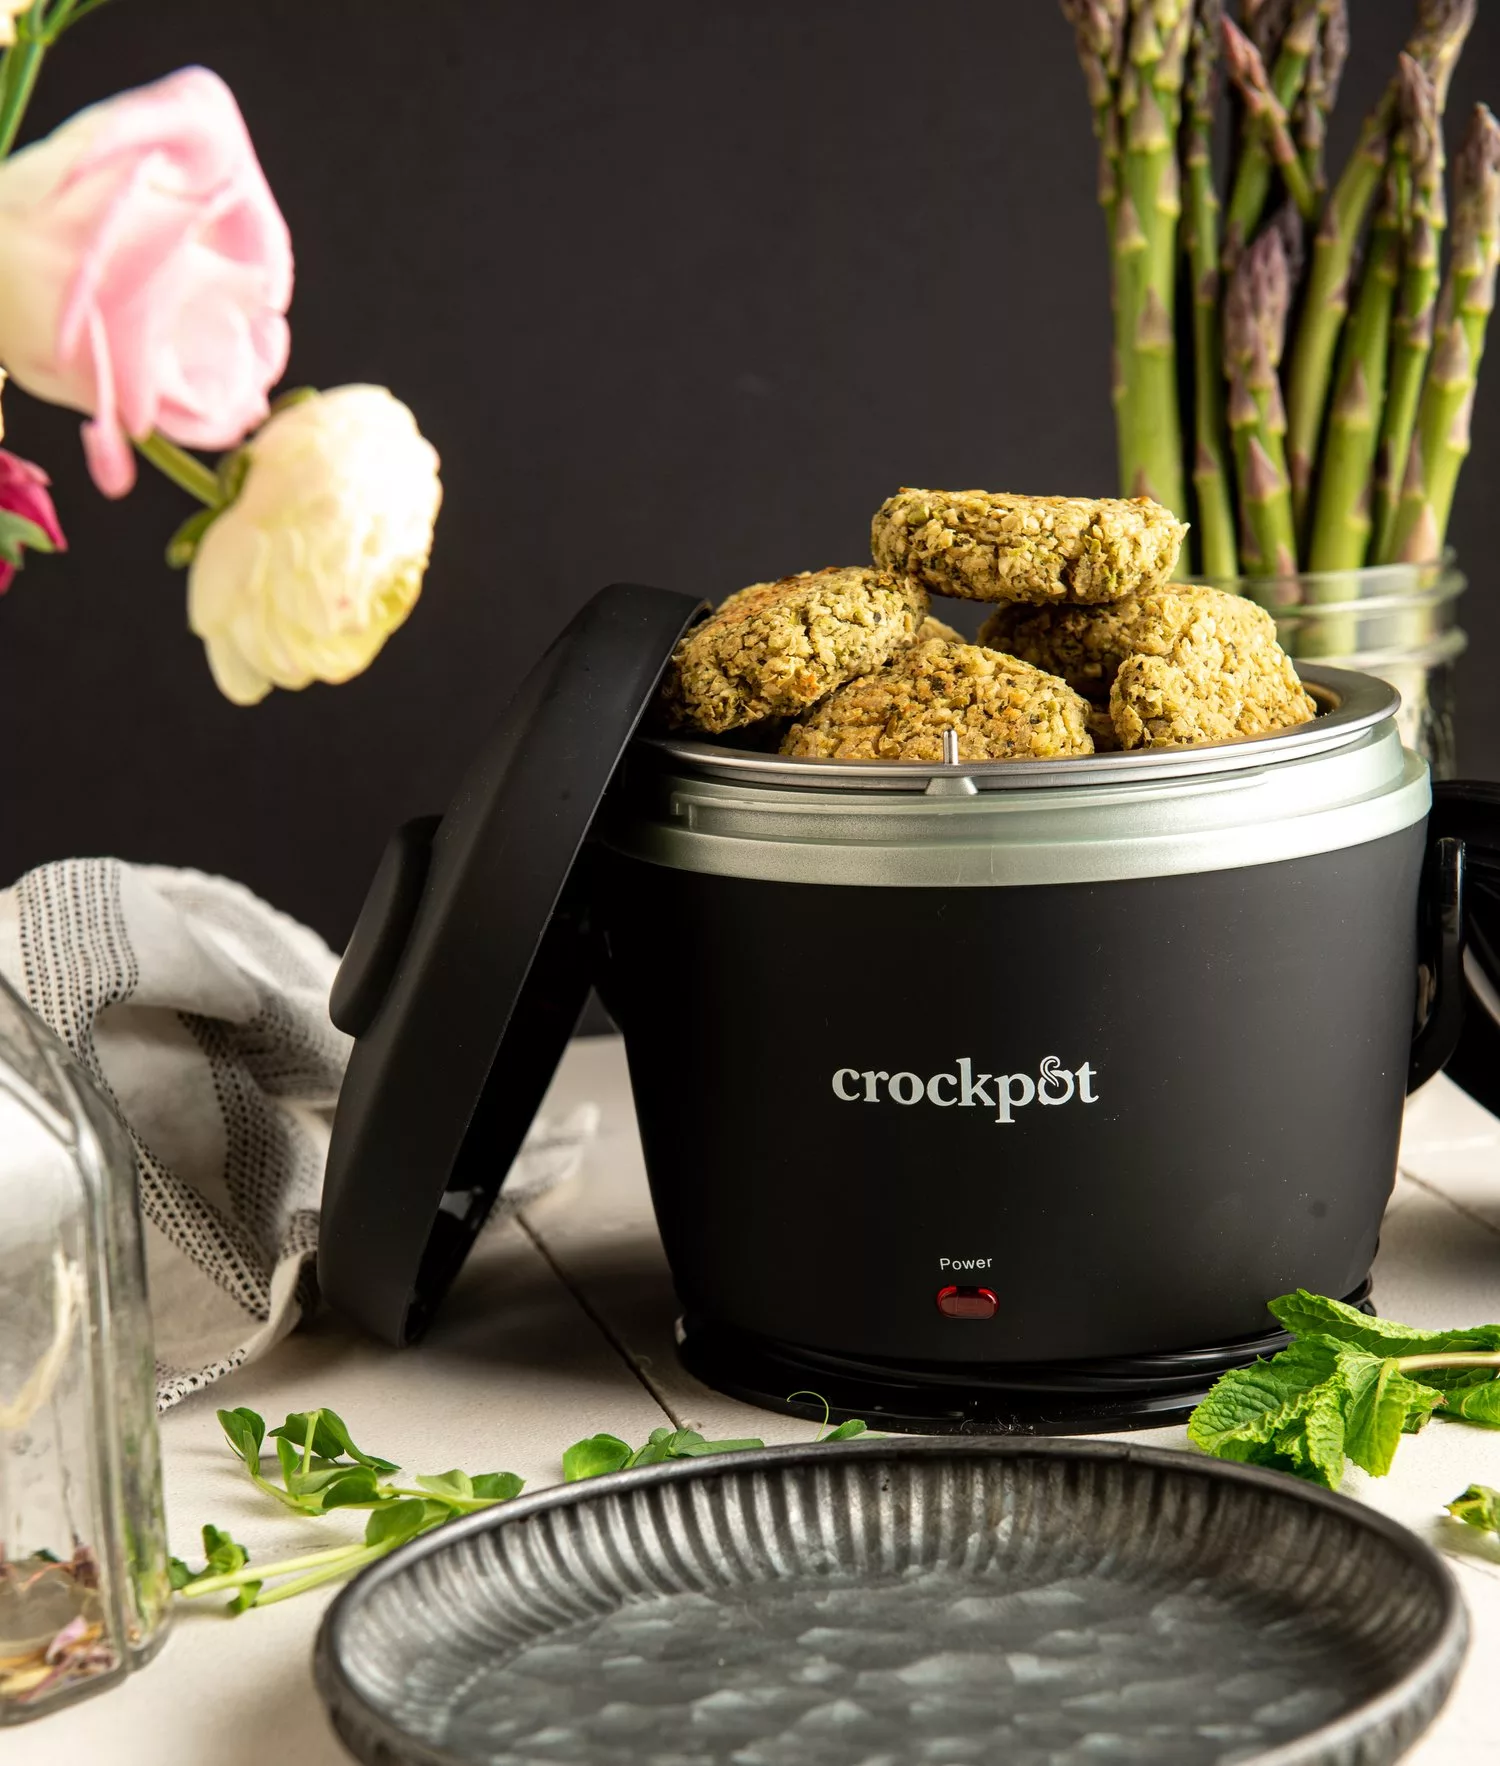 crockpot filled with white bean mint and green pea falafel patties. Roses and a cup of asparagus in the background